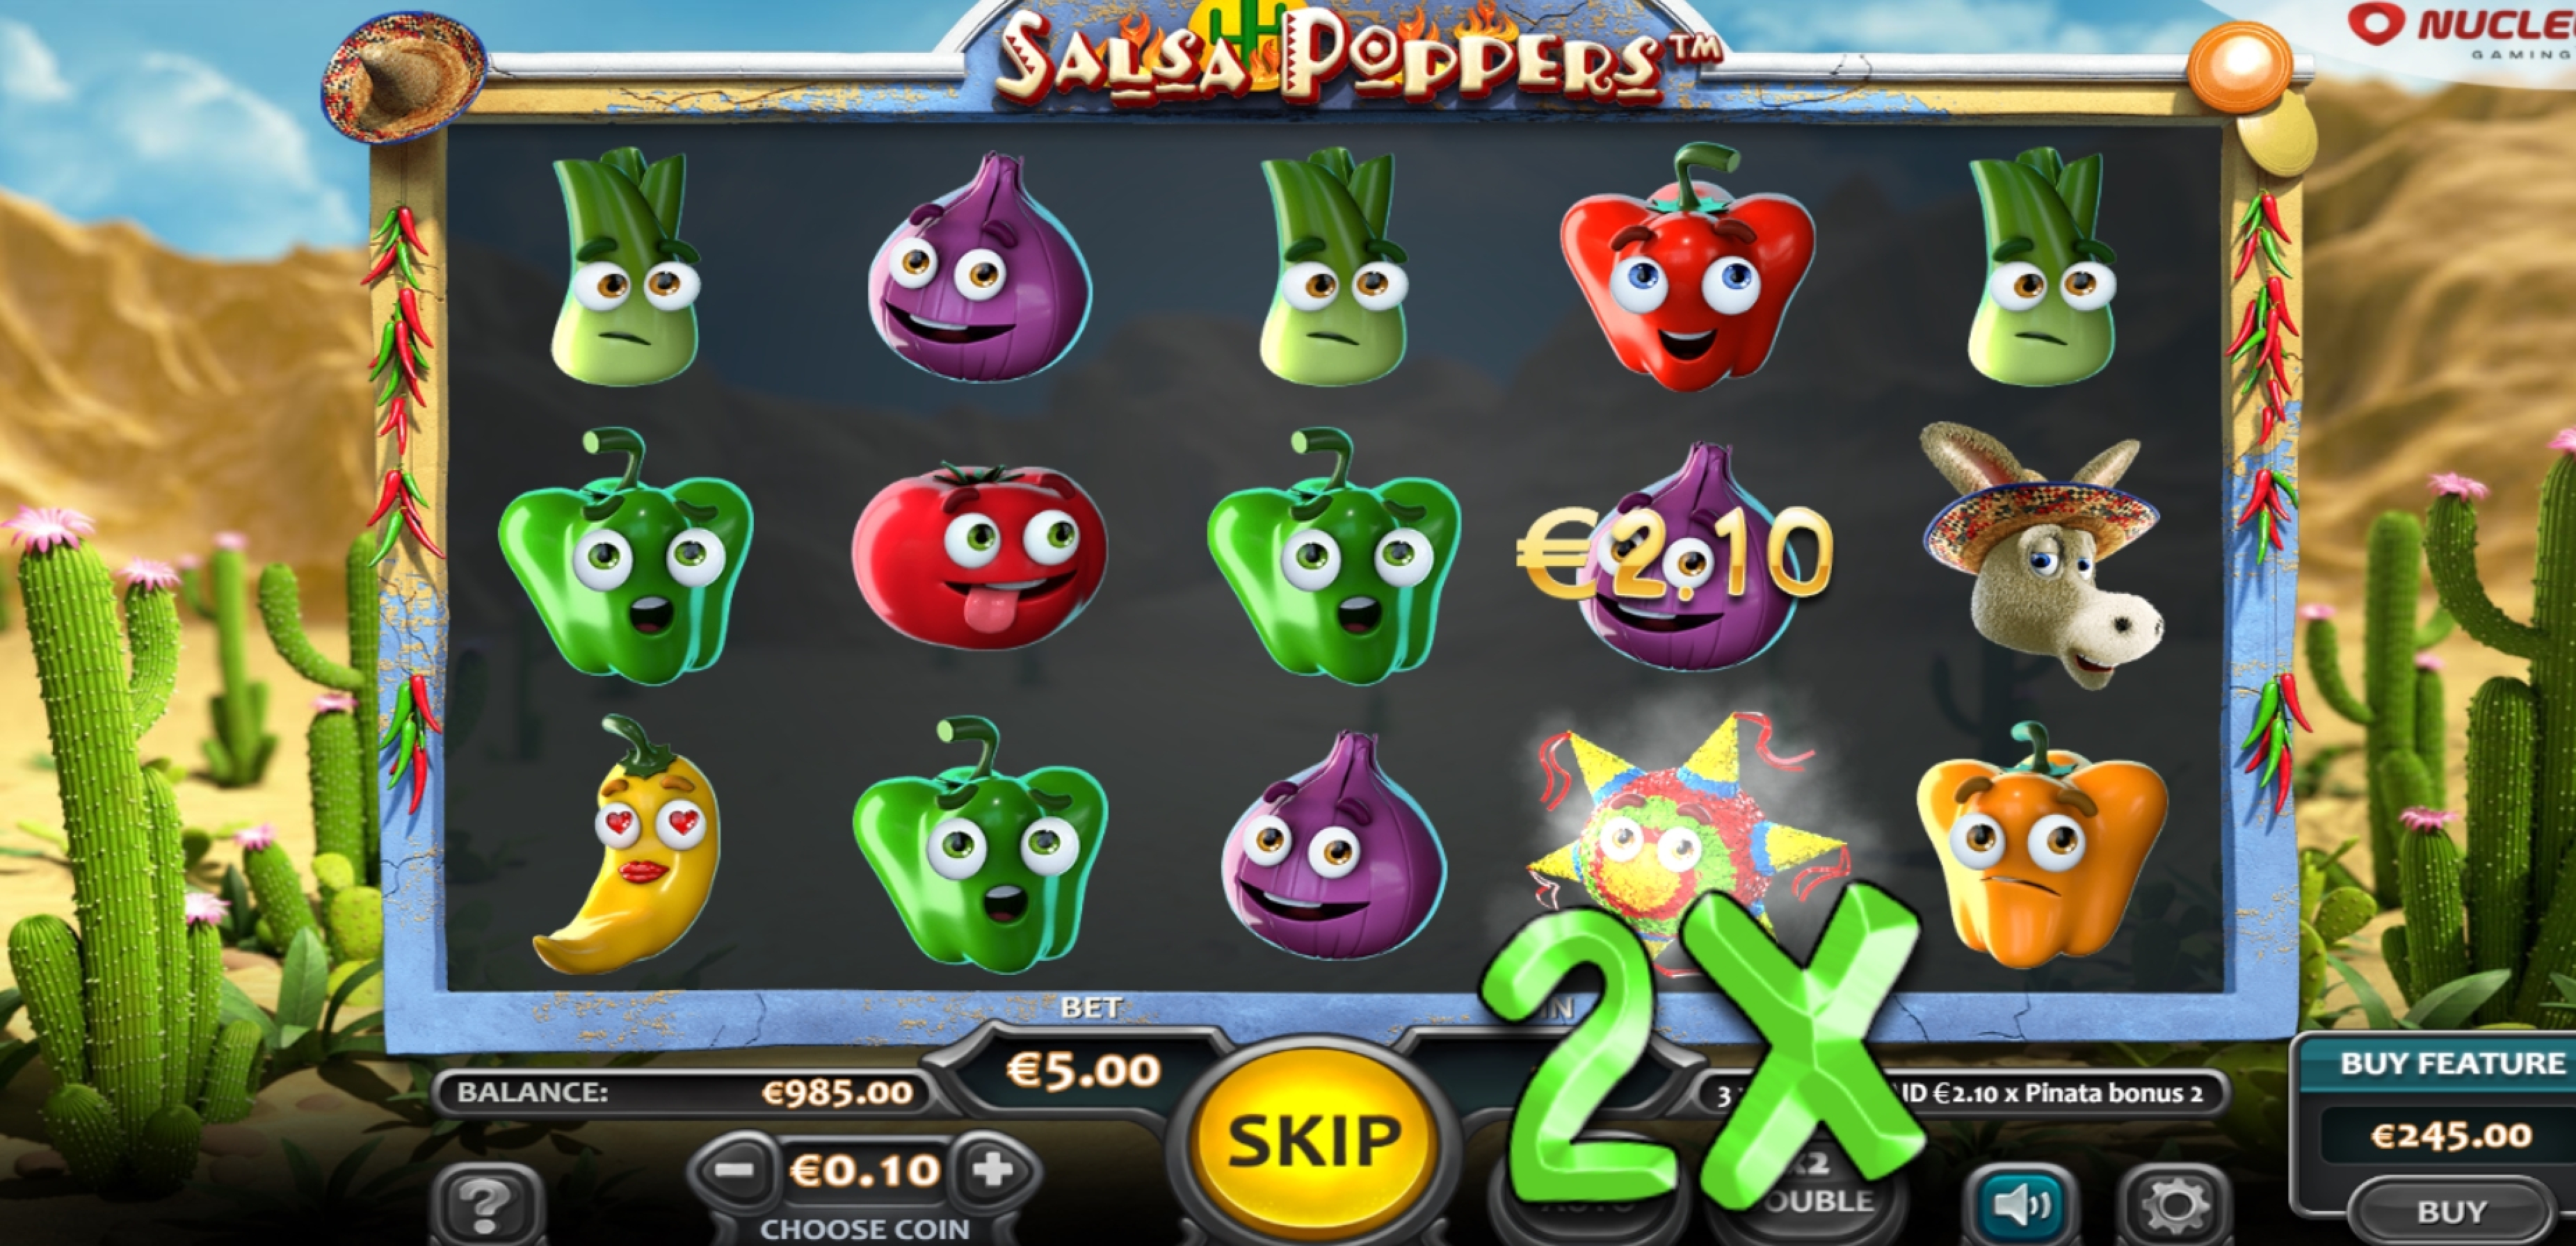 Win Money in Salsa Poppers Free Slot Game by Nucleus Gaming